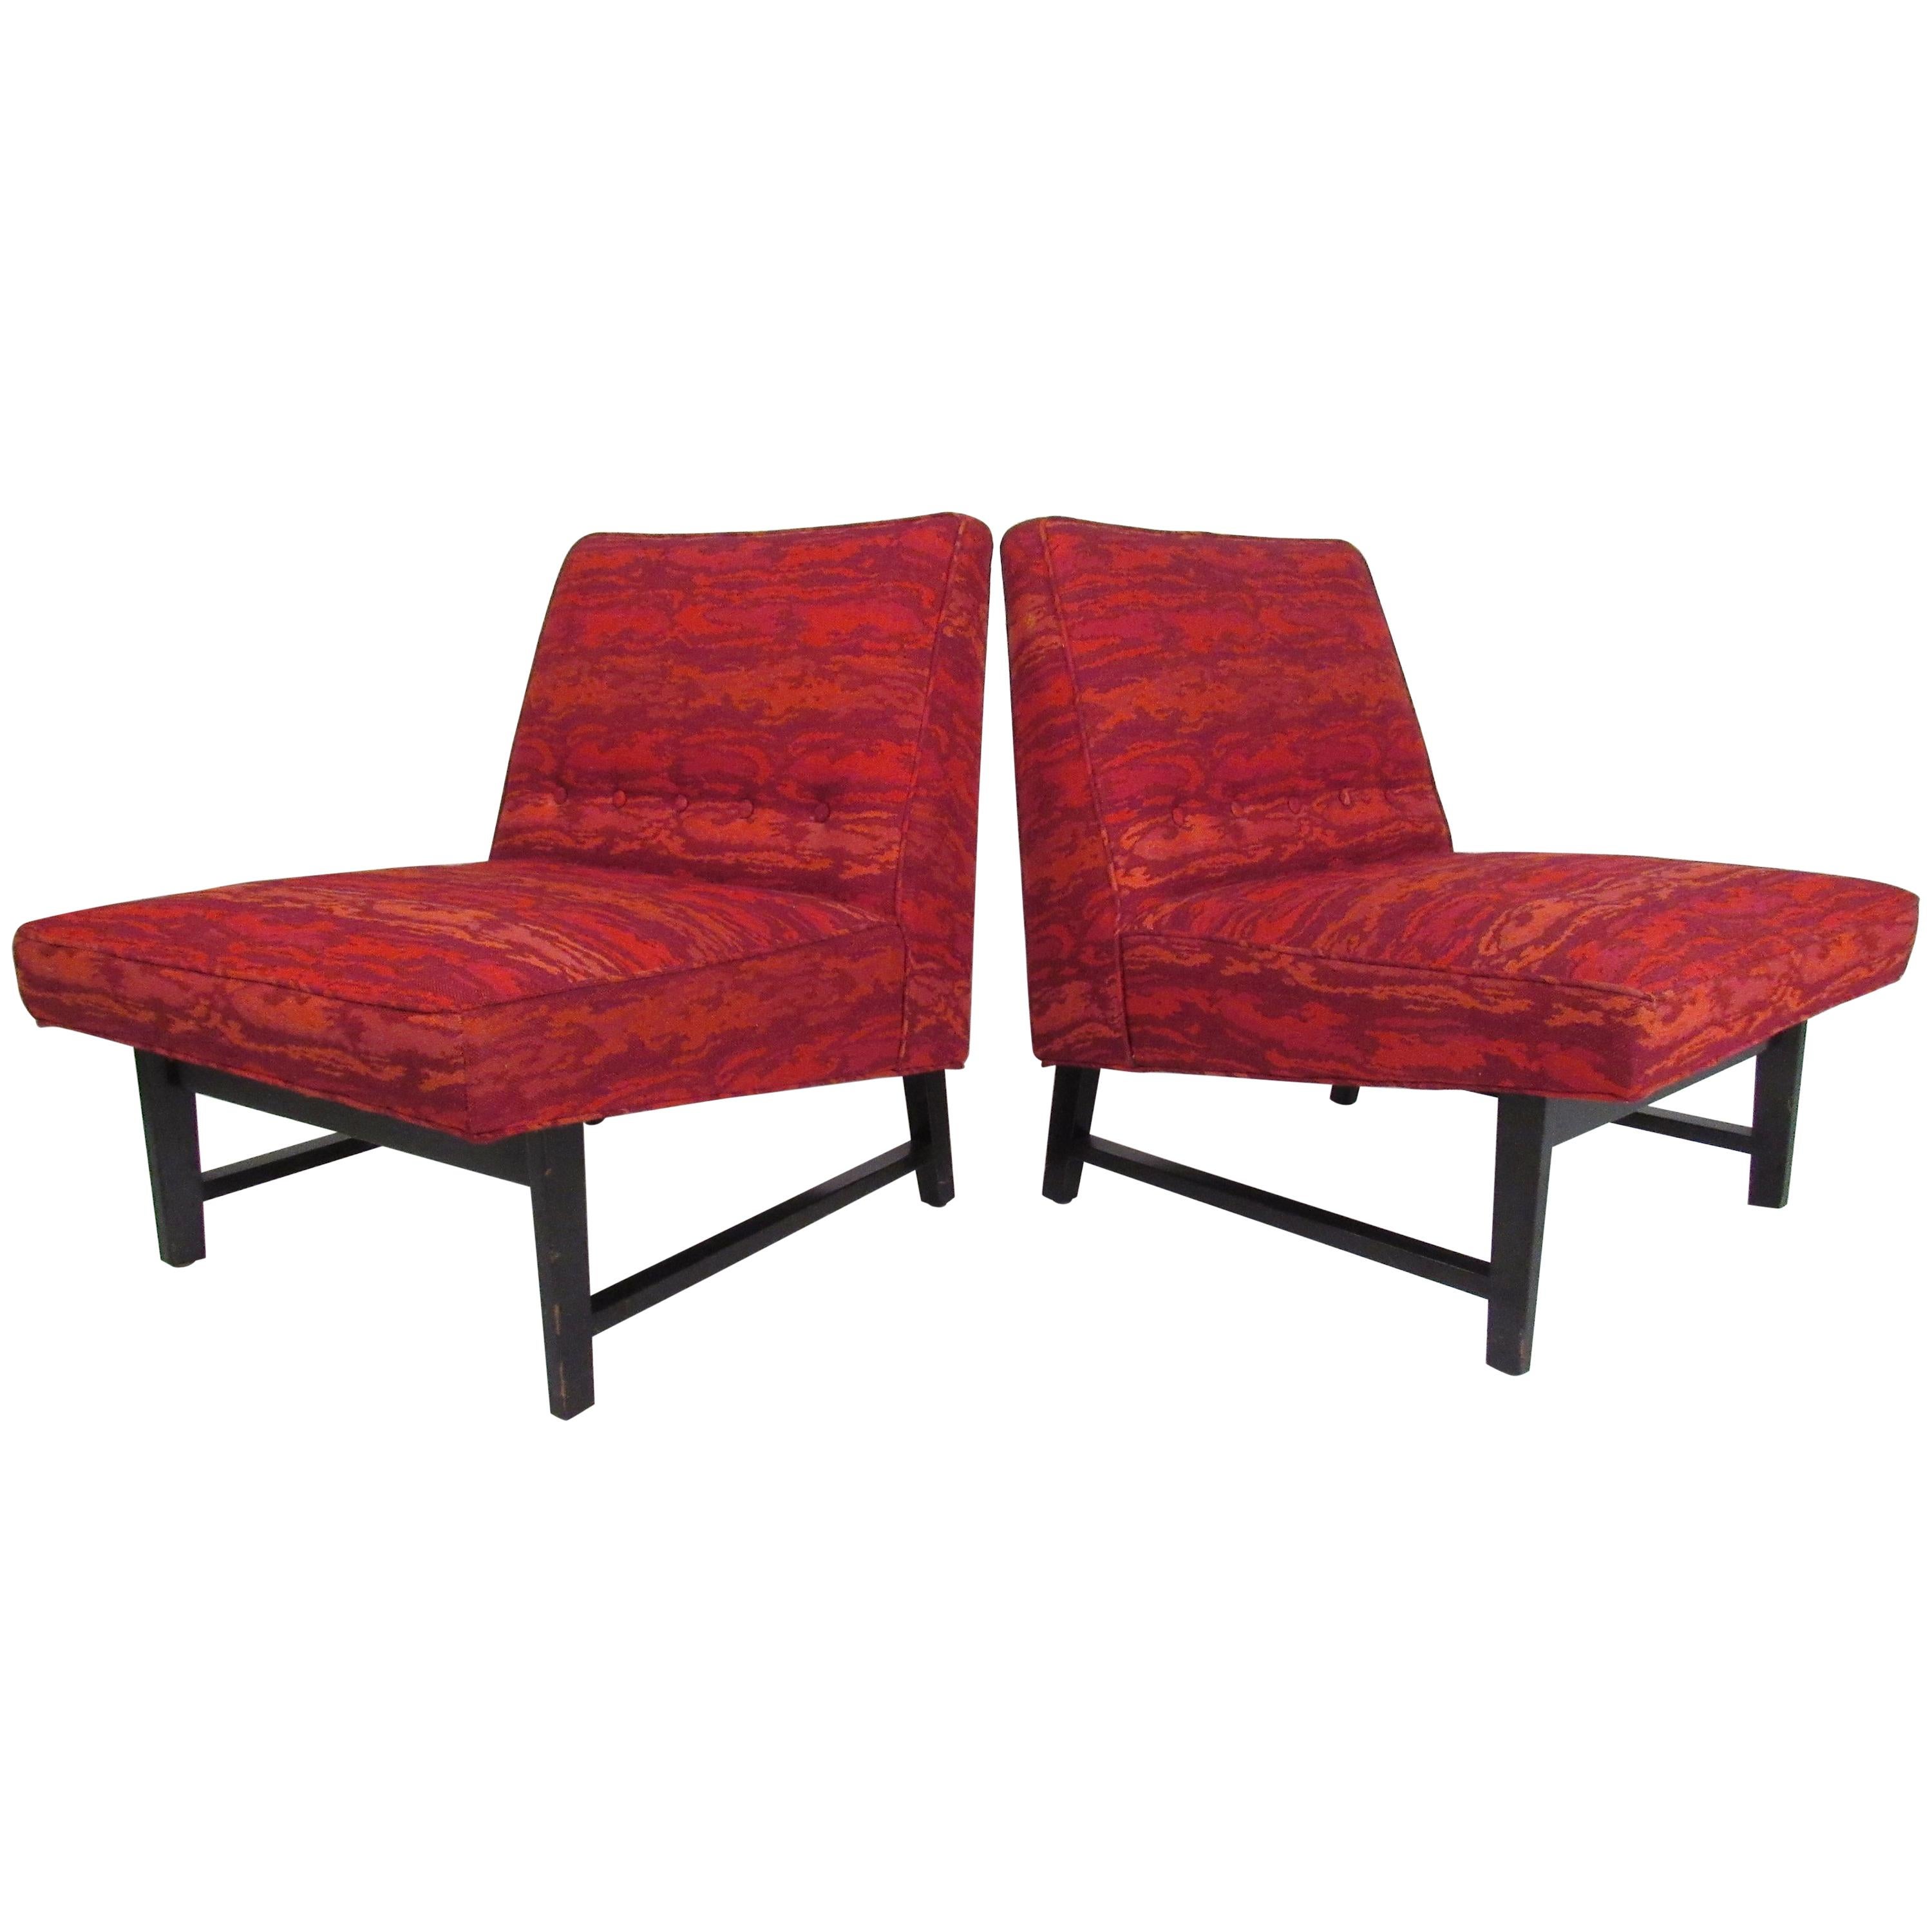 Mid-Century Modern Slipper Chairs by Edward Wormley for Dunbar For Sale